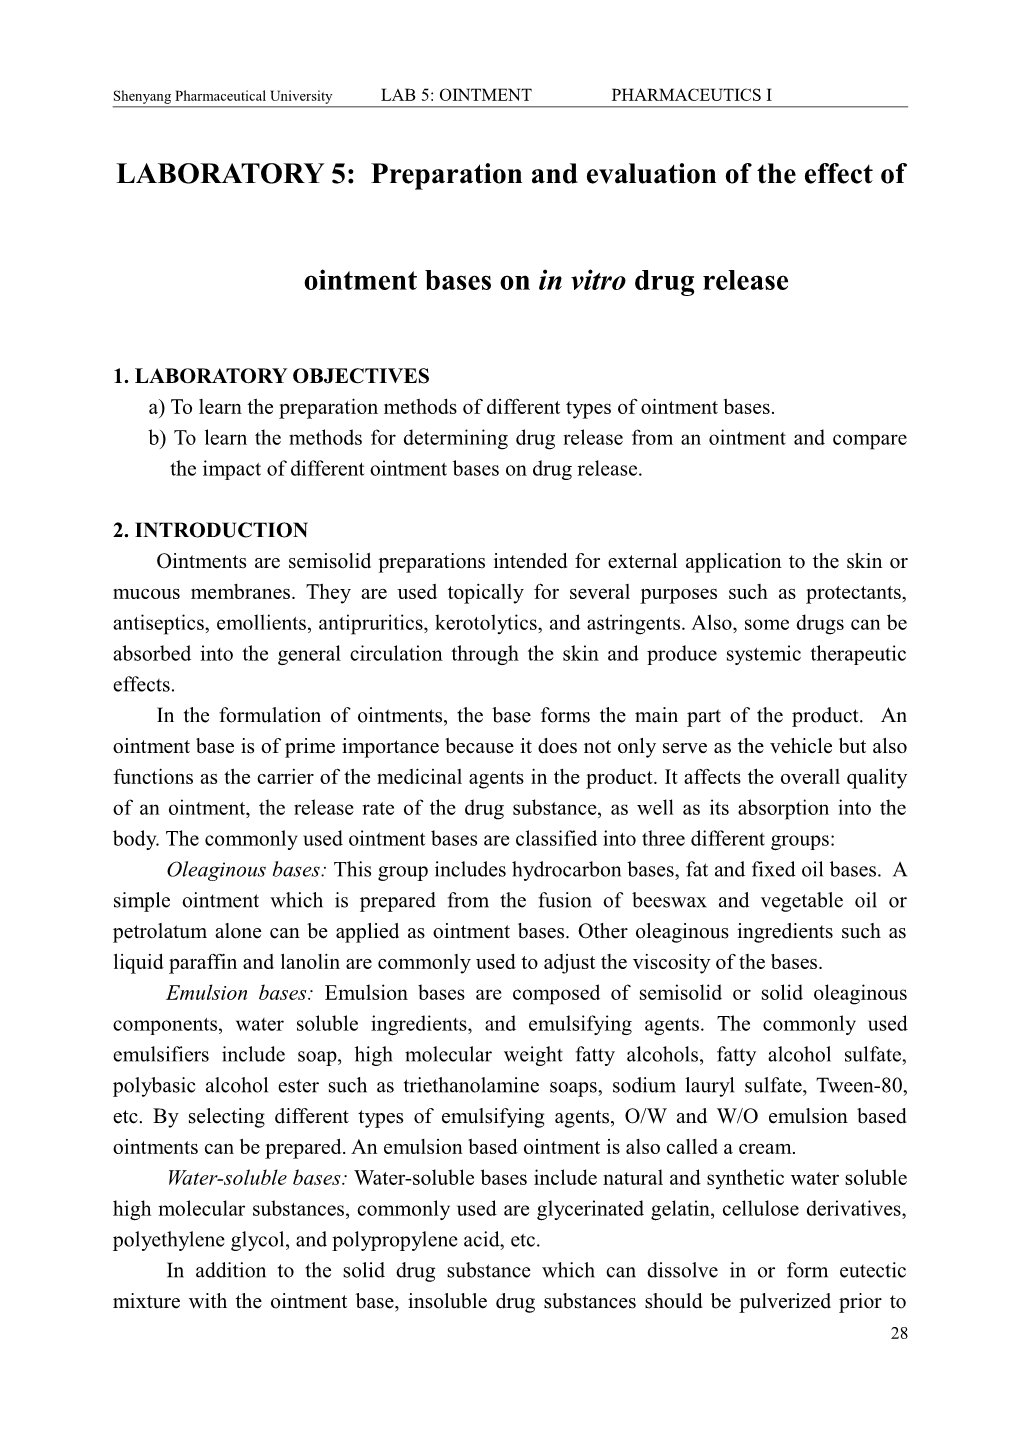 LABORATORY 5: Preparation and Evaluation of the Effect of Ointment Bases on in Vitro Drug